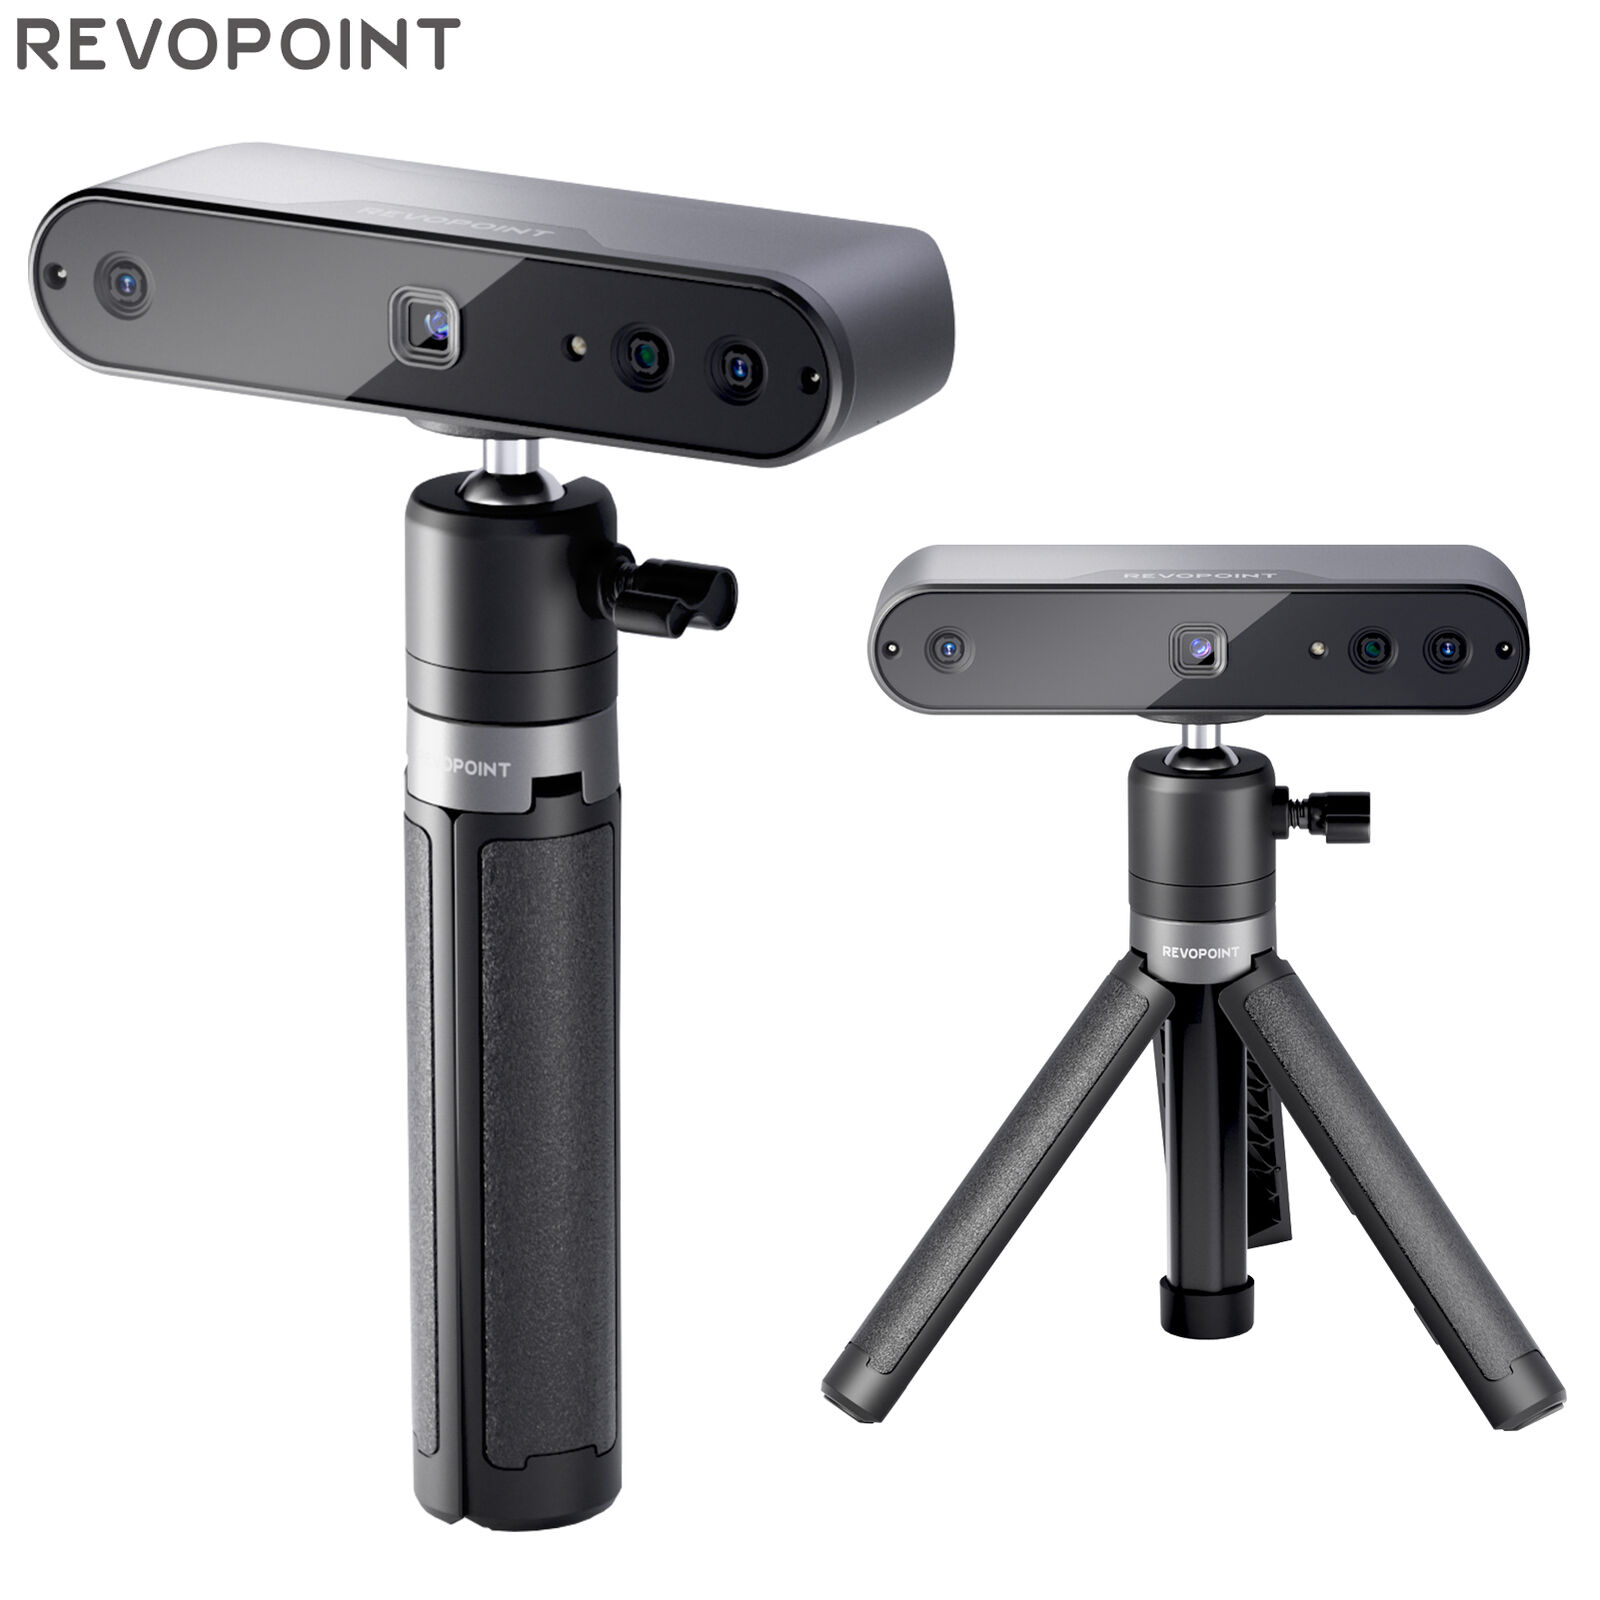 Revopoint INSPIRE 3D Scanner 0.2 mm Accuracy 18FPS Scanning Speed Handheld F4J0